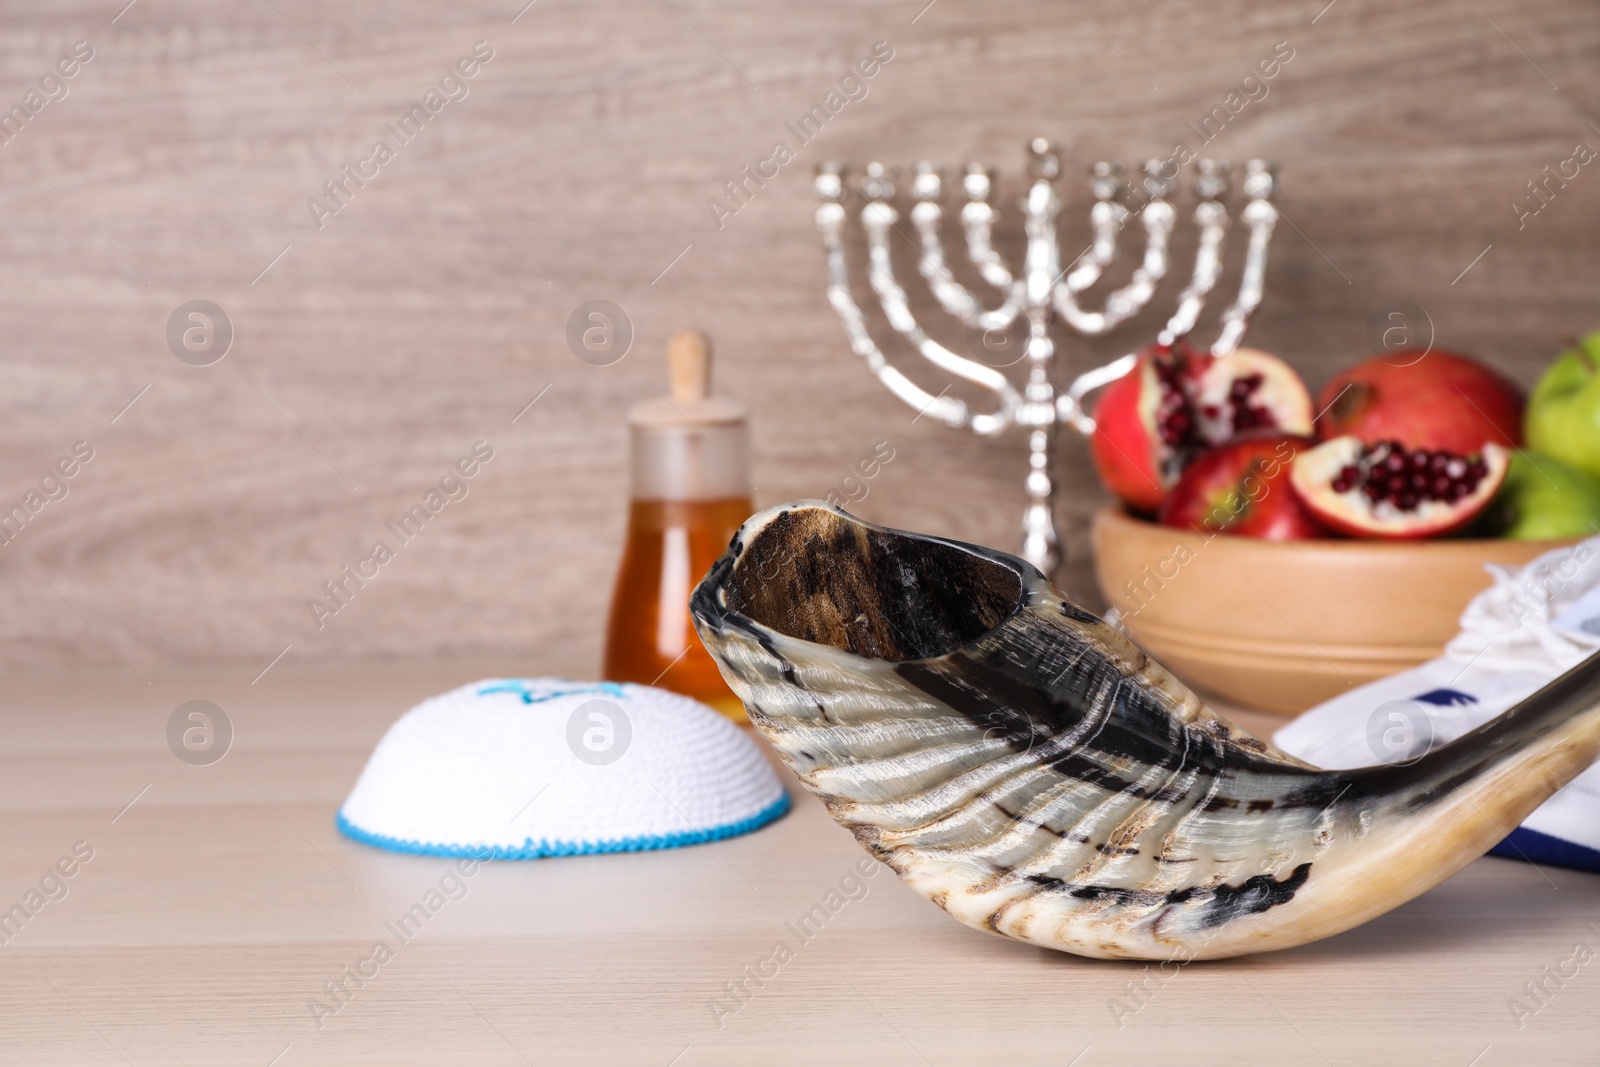 Photo of Shofar and other Rosh Hashanah holiday attributes on wooden table.